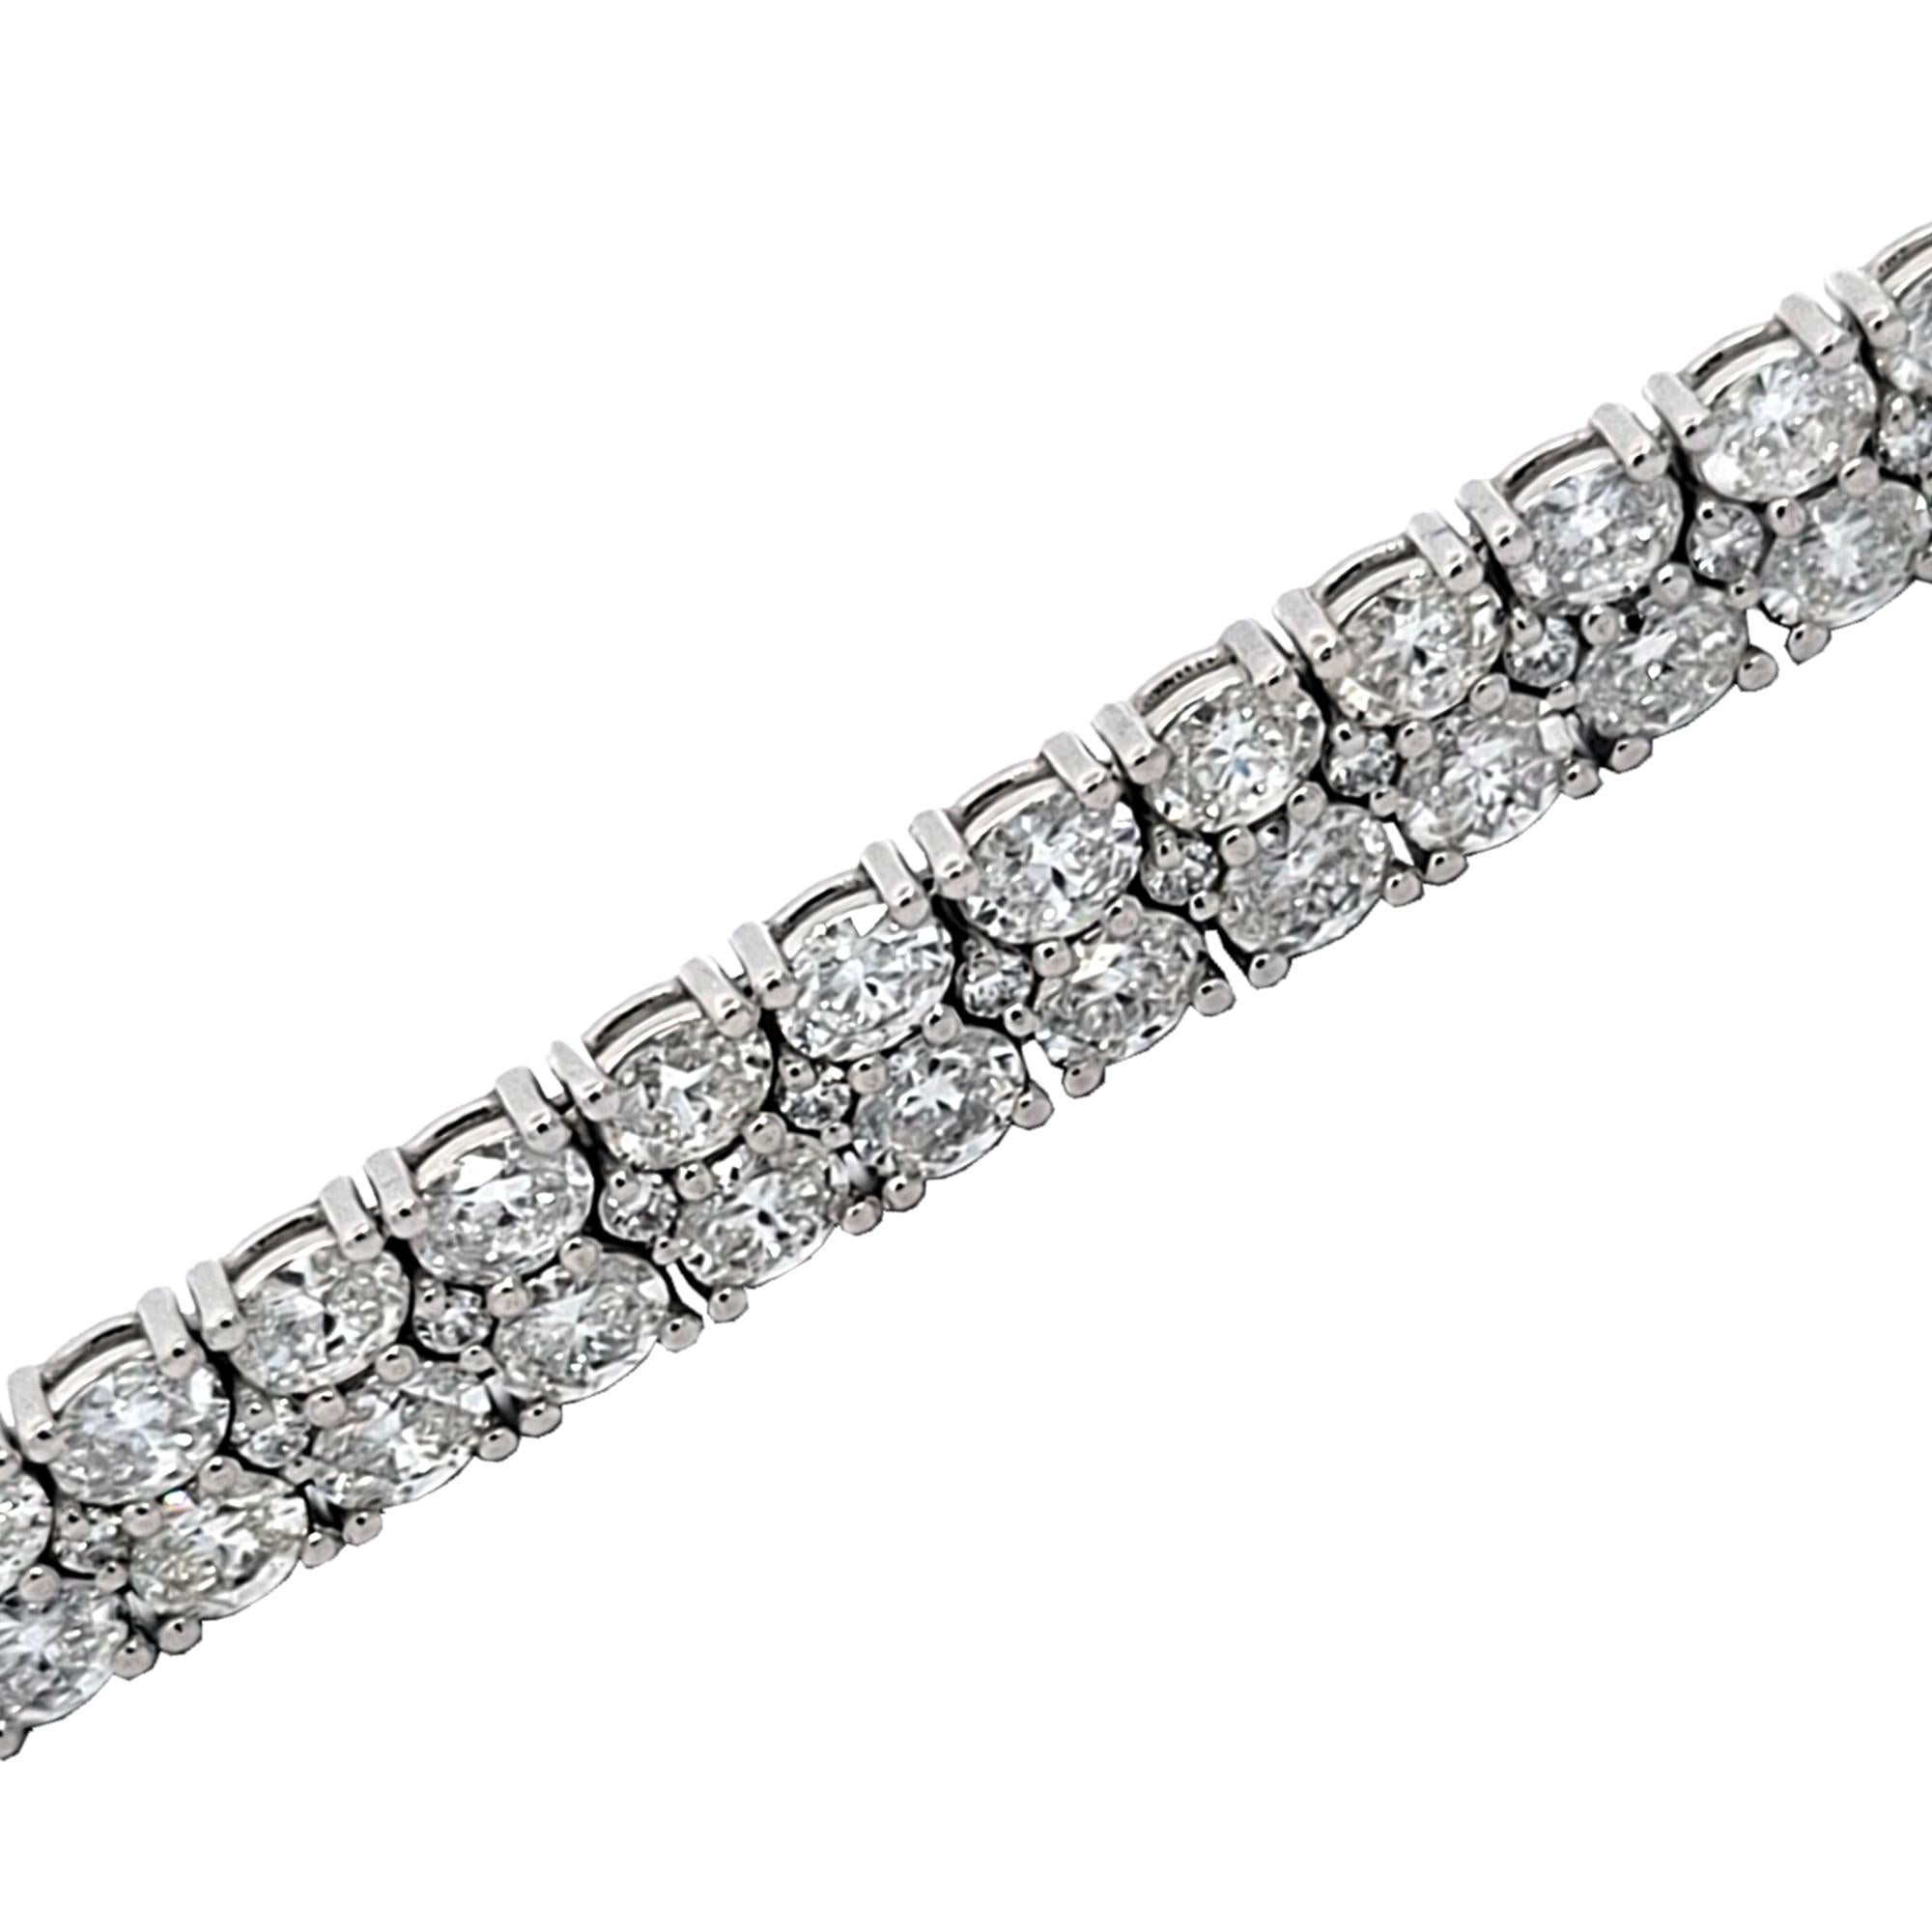 This elegant Diamond Tennis Bracelet consists of 41 Links of double row Oval/ Round Brilliant diamonds set in Platinum. It is 7 inch long and about 7 mm wide.  This bracelet is made by the highest quality craftsmanship making it extremely flexible.